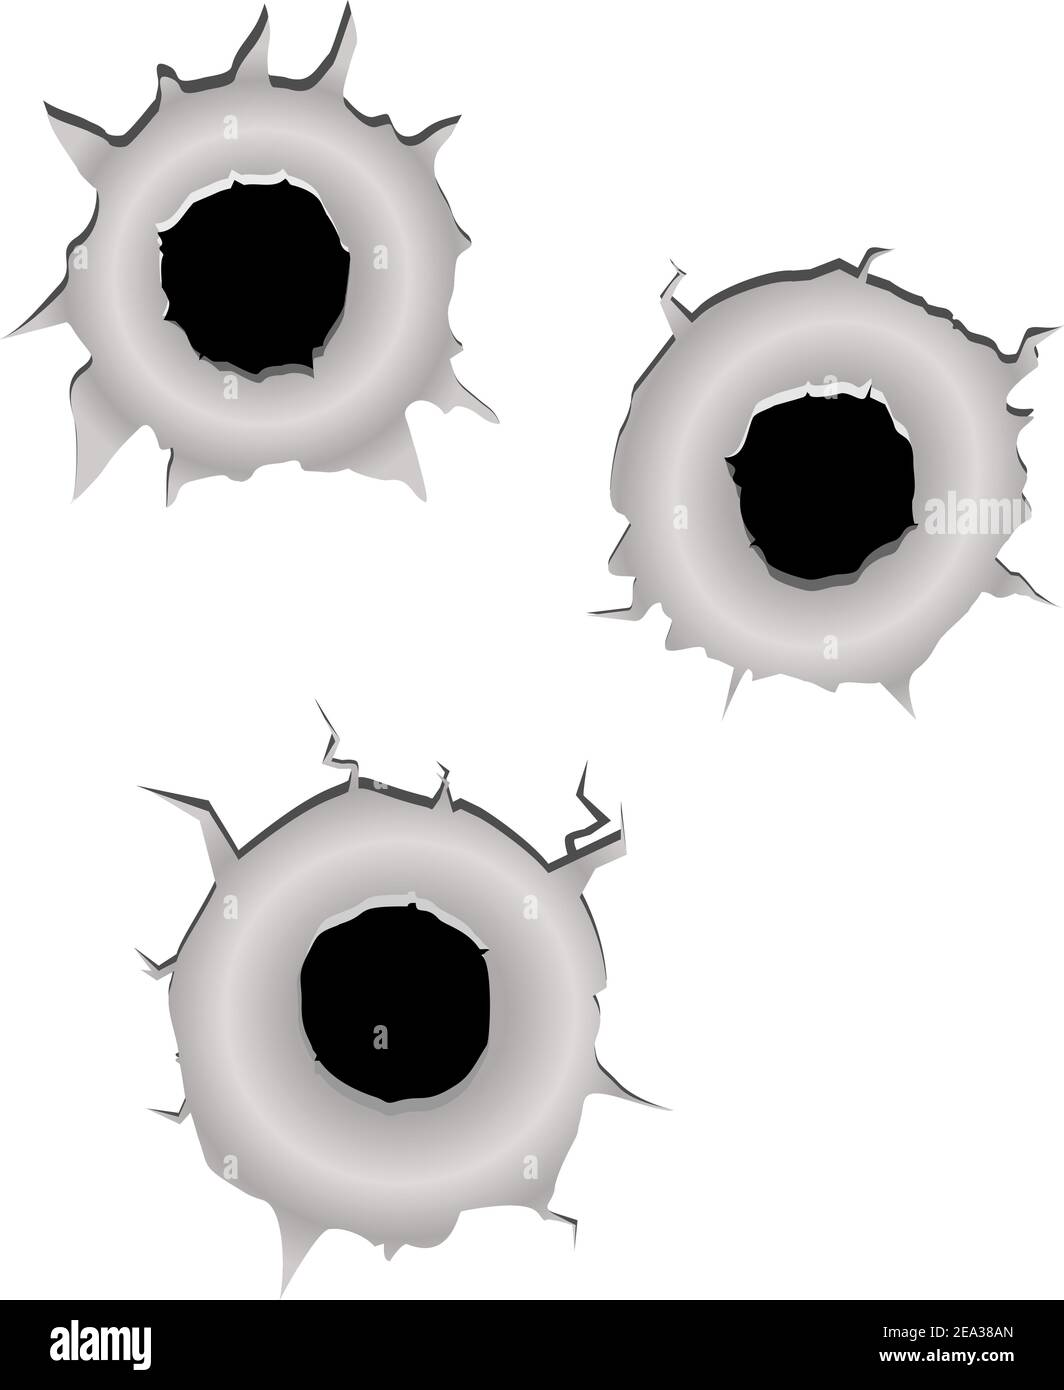 Bullet holes in sign Stock Vector Images - Alamy